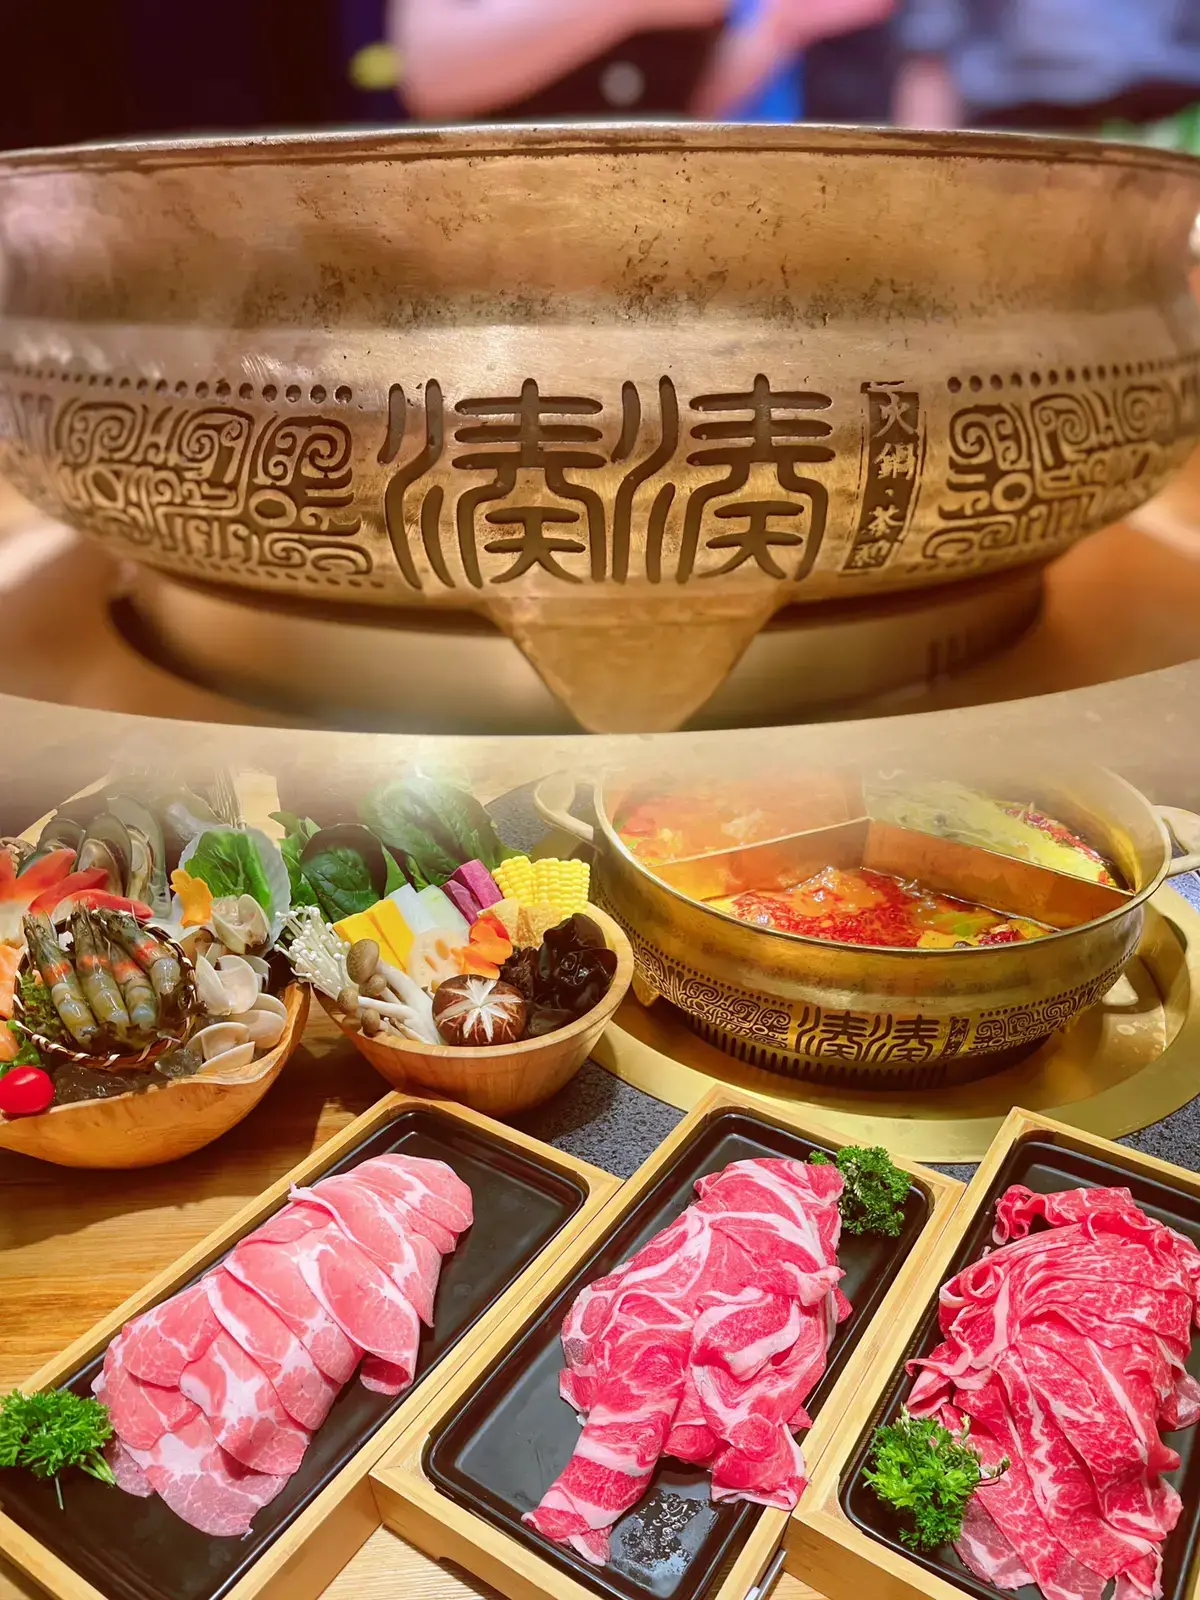 Coucou Hotpot Singapore – Taiwanese-Style Hotpot Restaurant Opens NEW Jewel  Changi Airport Outlet. i12 Katong Likely To Be Next Location 